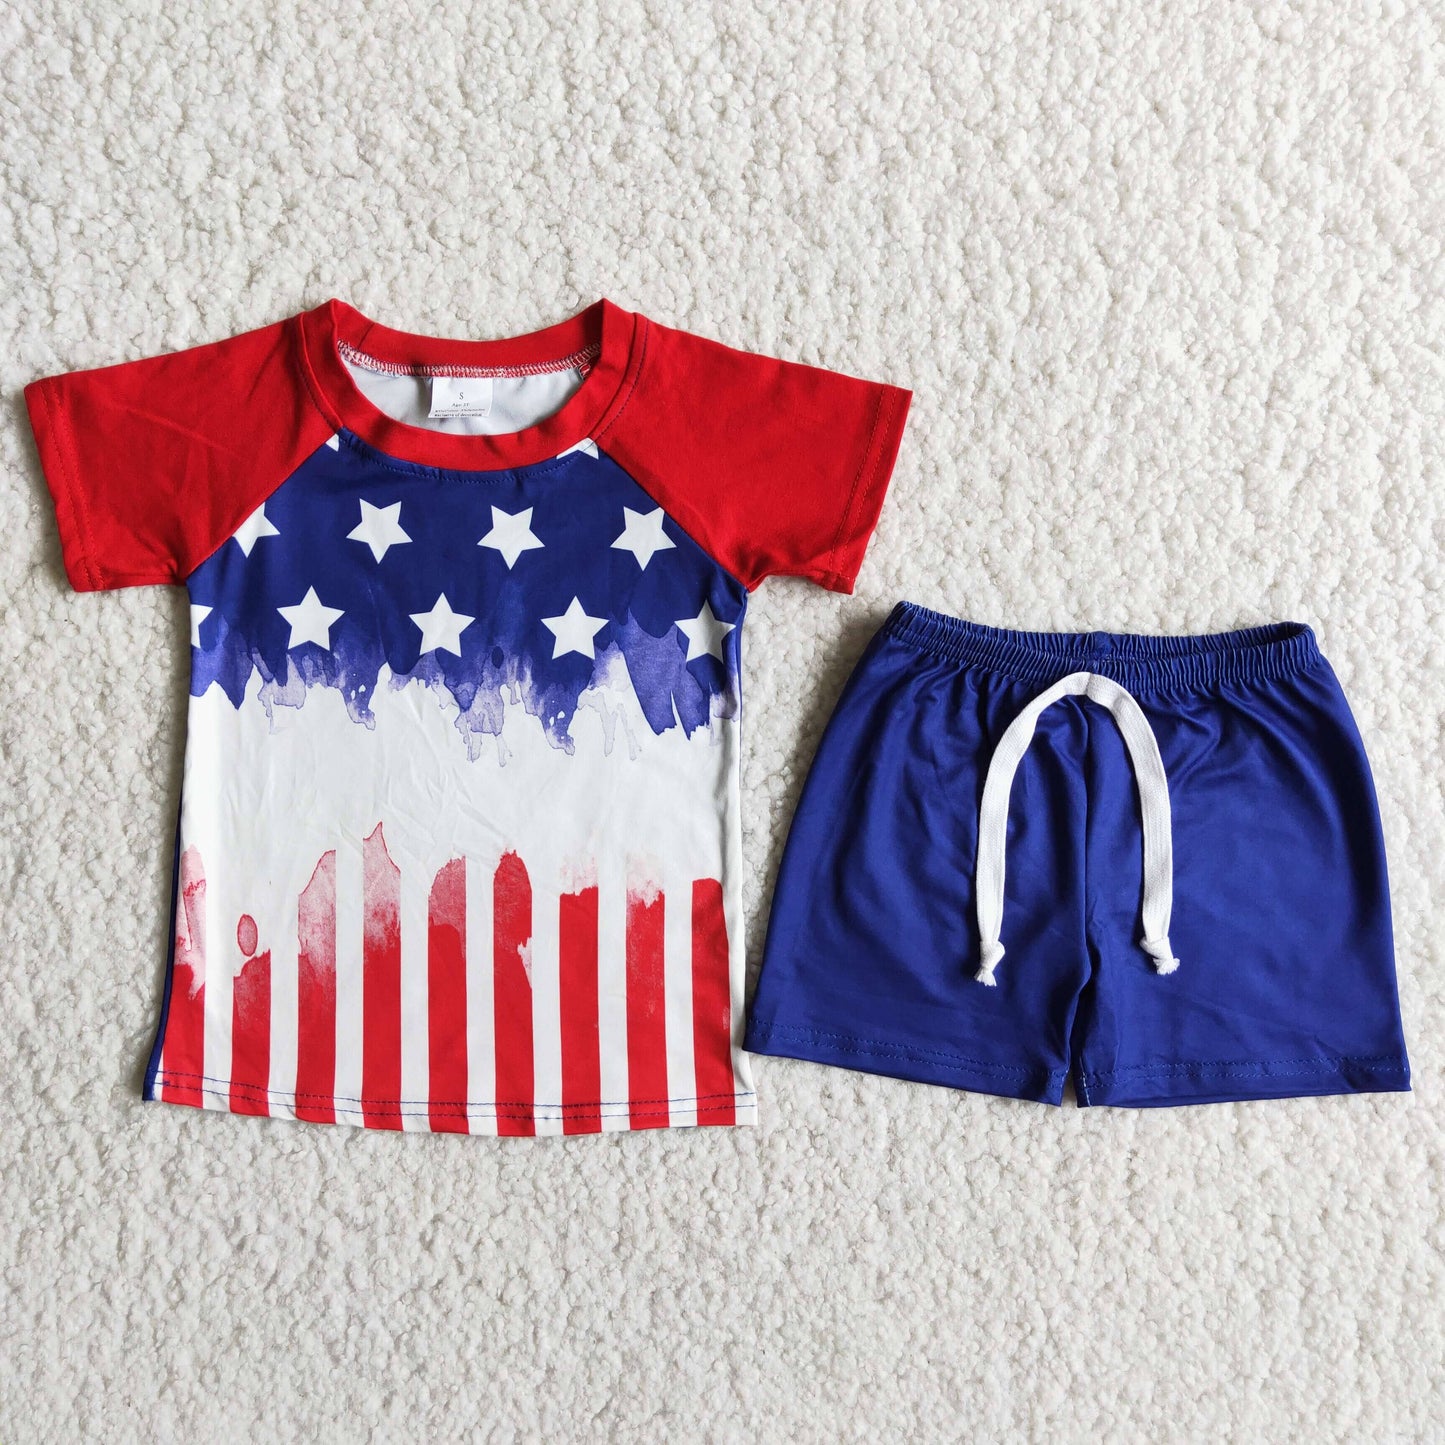 Flag Bleach Design Girls 4th of July Clothes